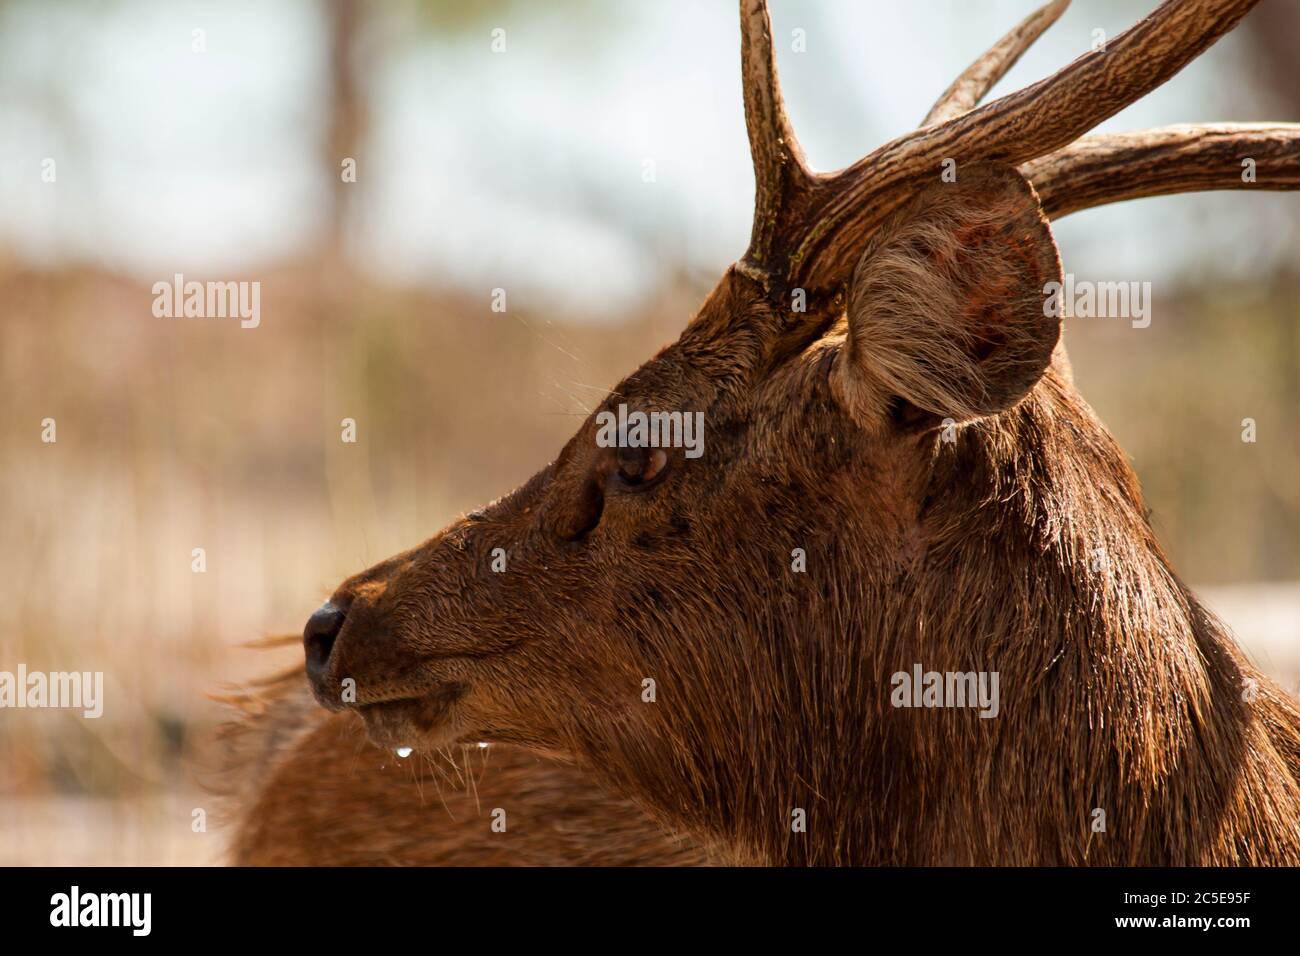 Male deer profile close up image Stock Photo